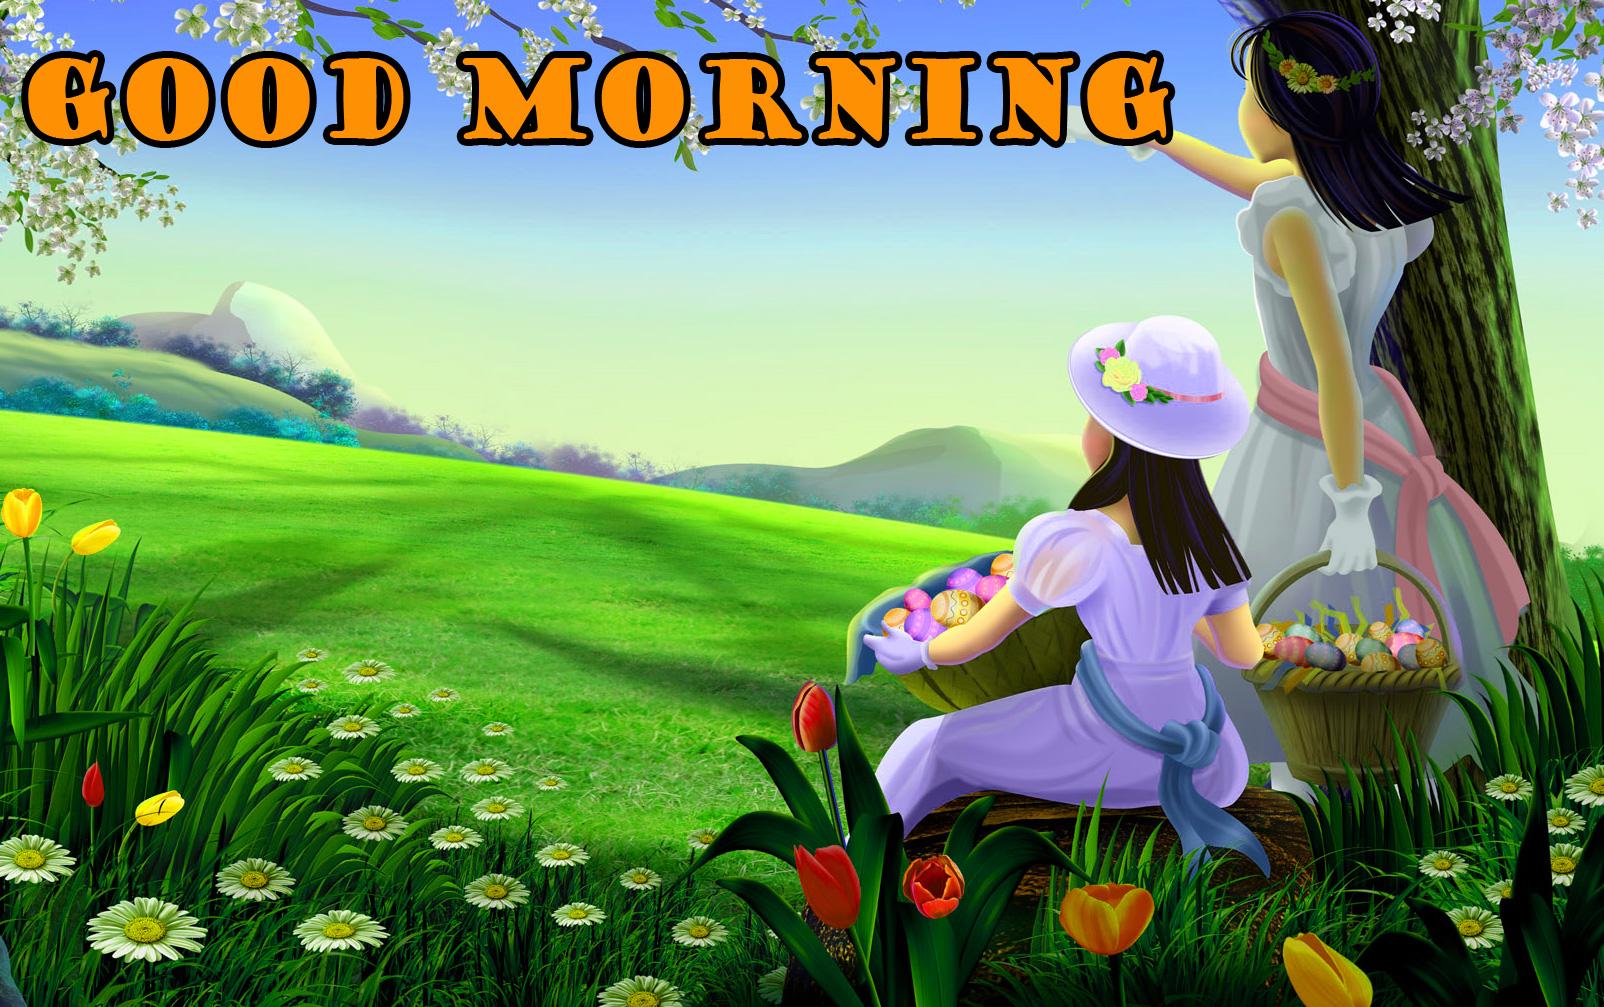 552+ Good Morning Nature Image Wallpapers Photo Pictures Download